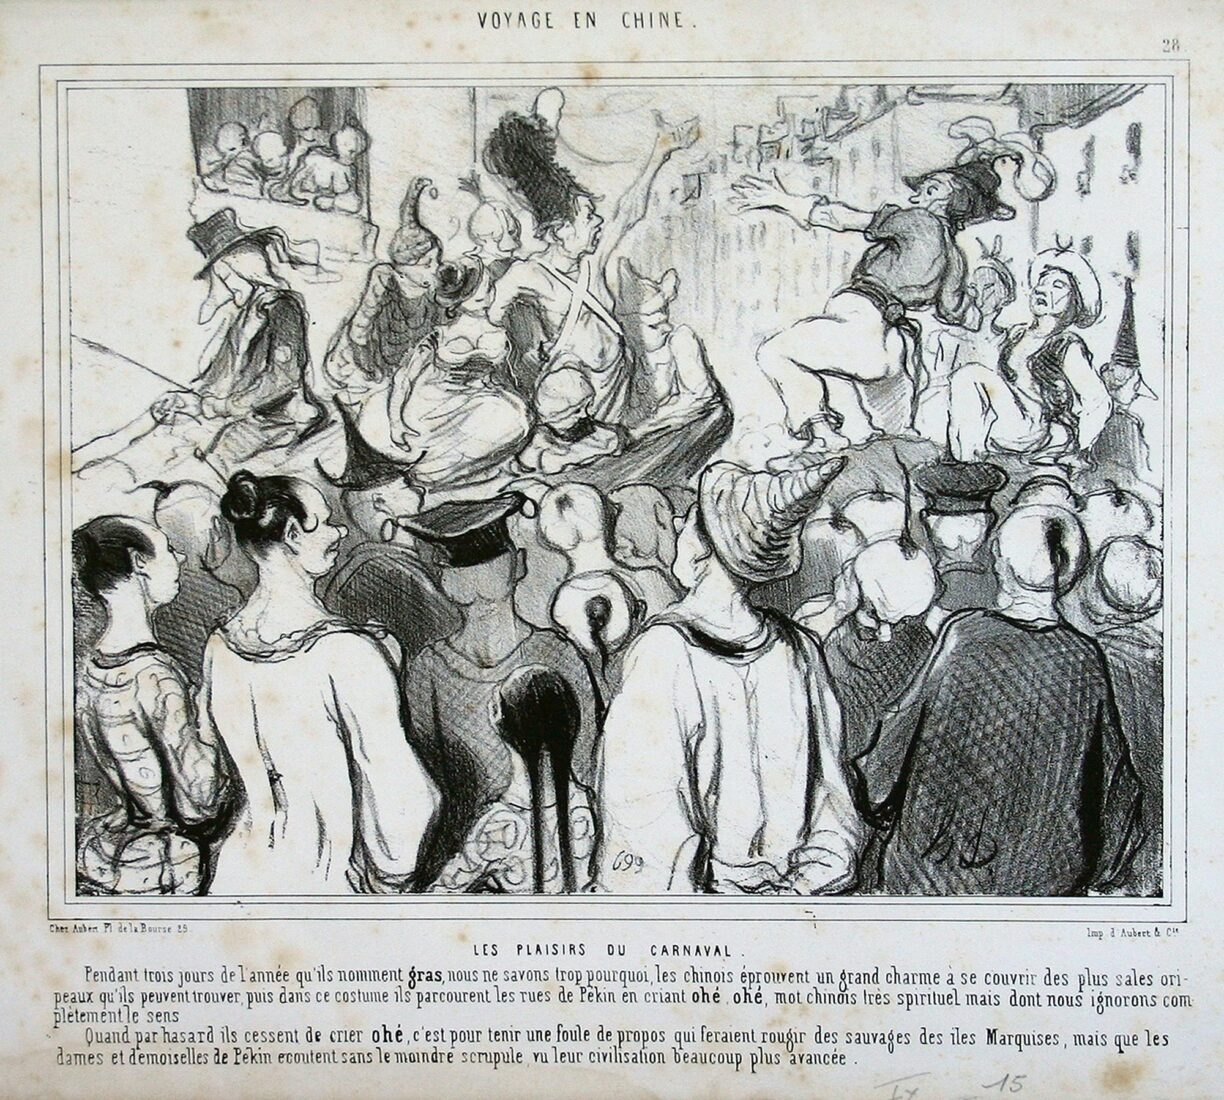 “The pleasures of Carnival” - Daumier Honore